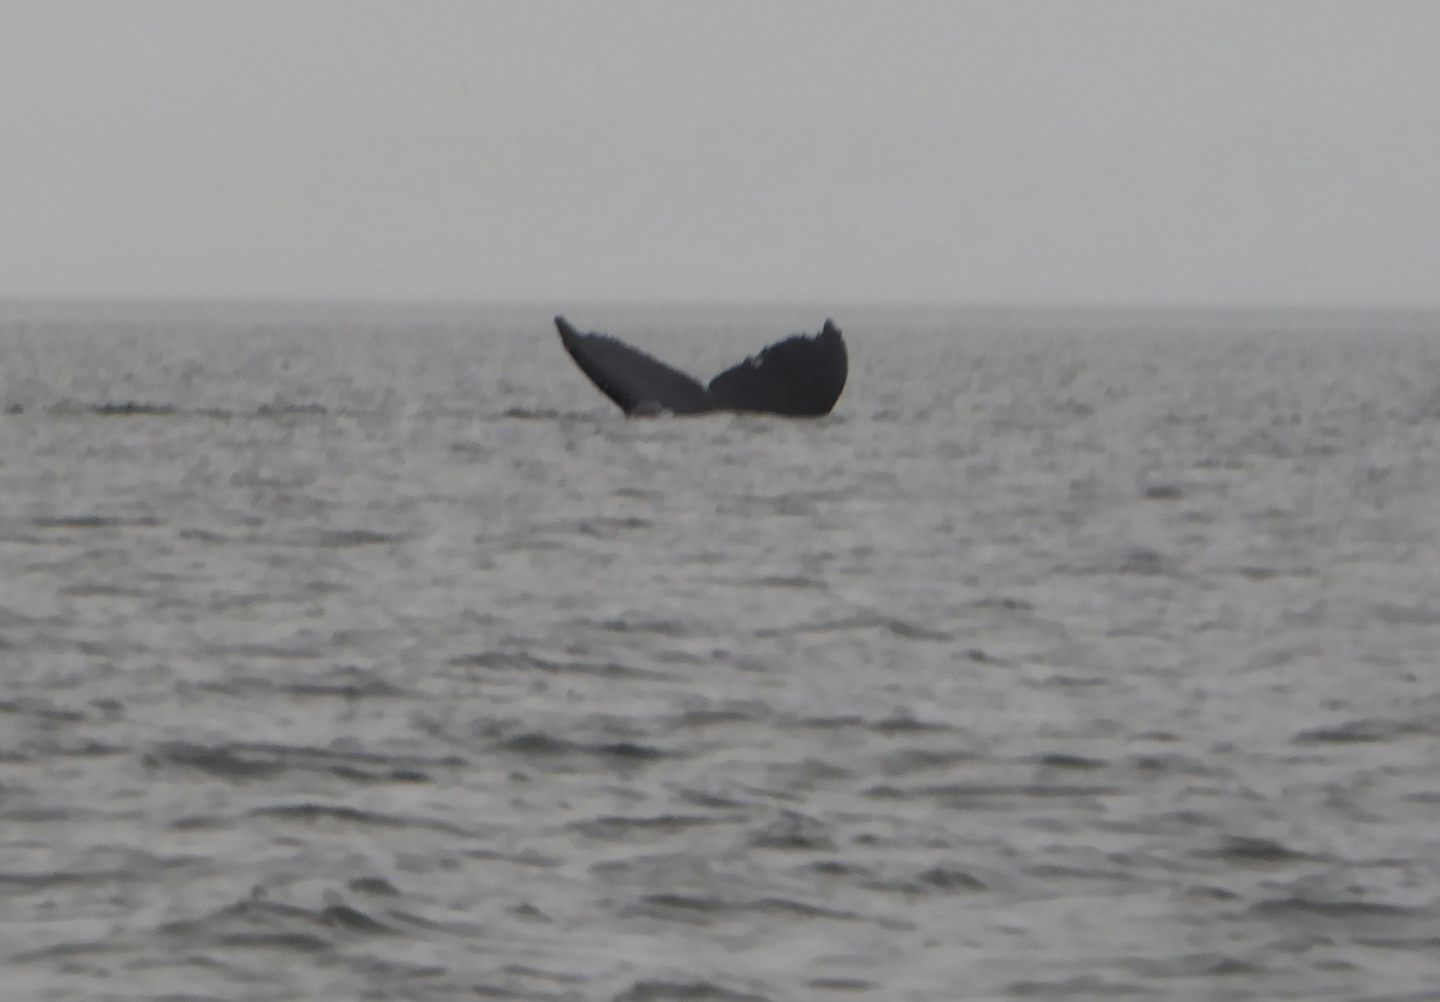 Saw a few whales on Juneau whale watching